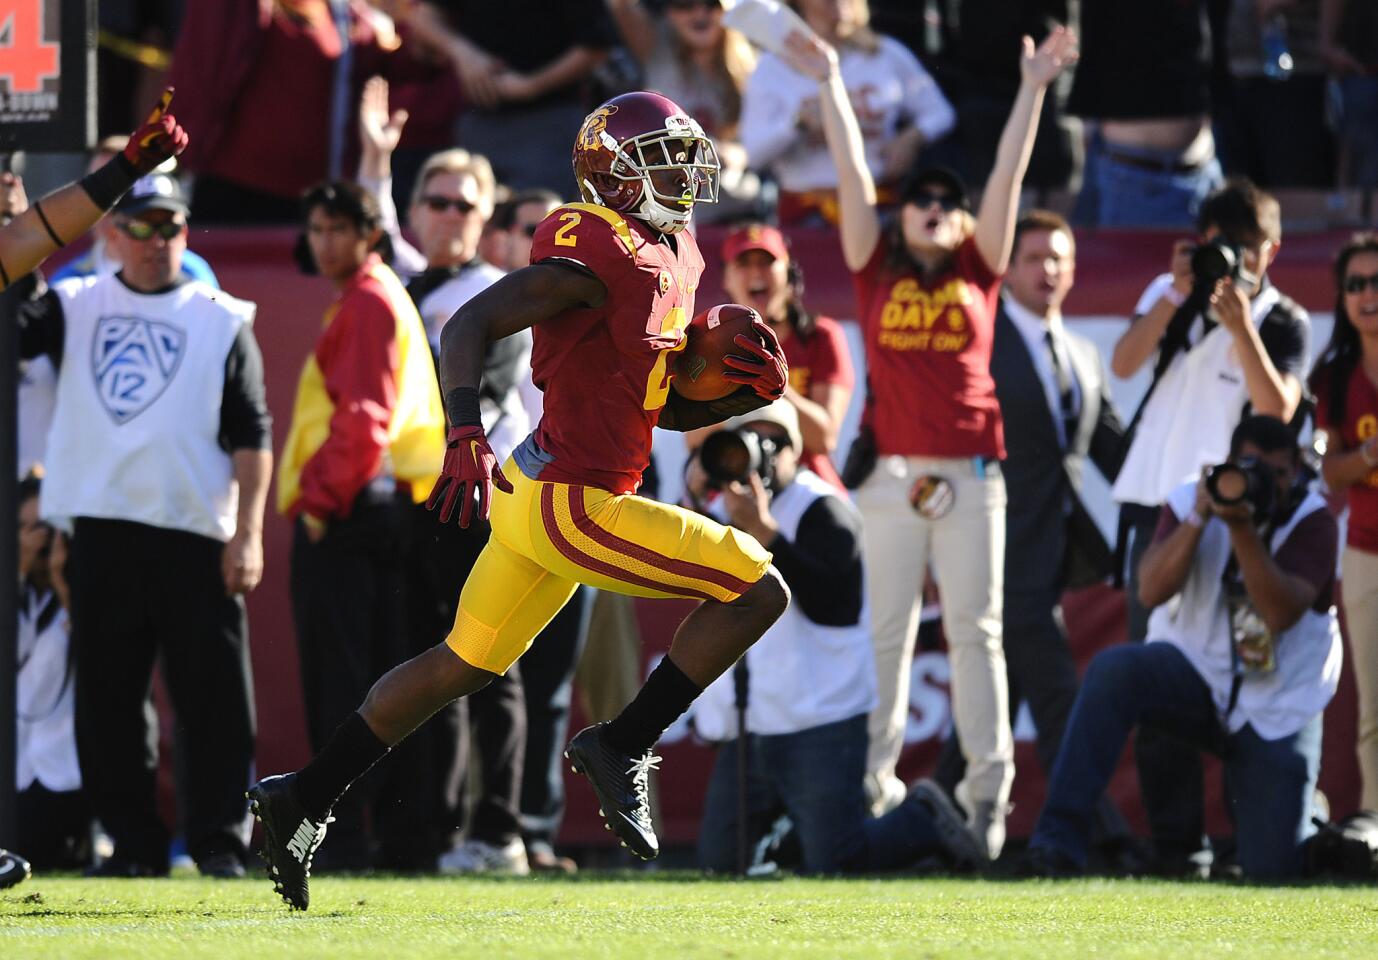 USC's Adoree' Jackson says he's focused on 'doing the little things right'